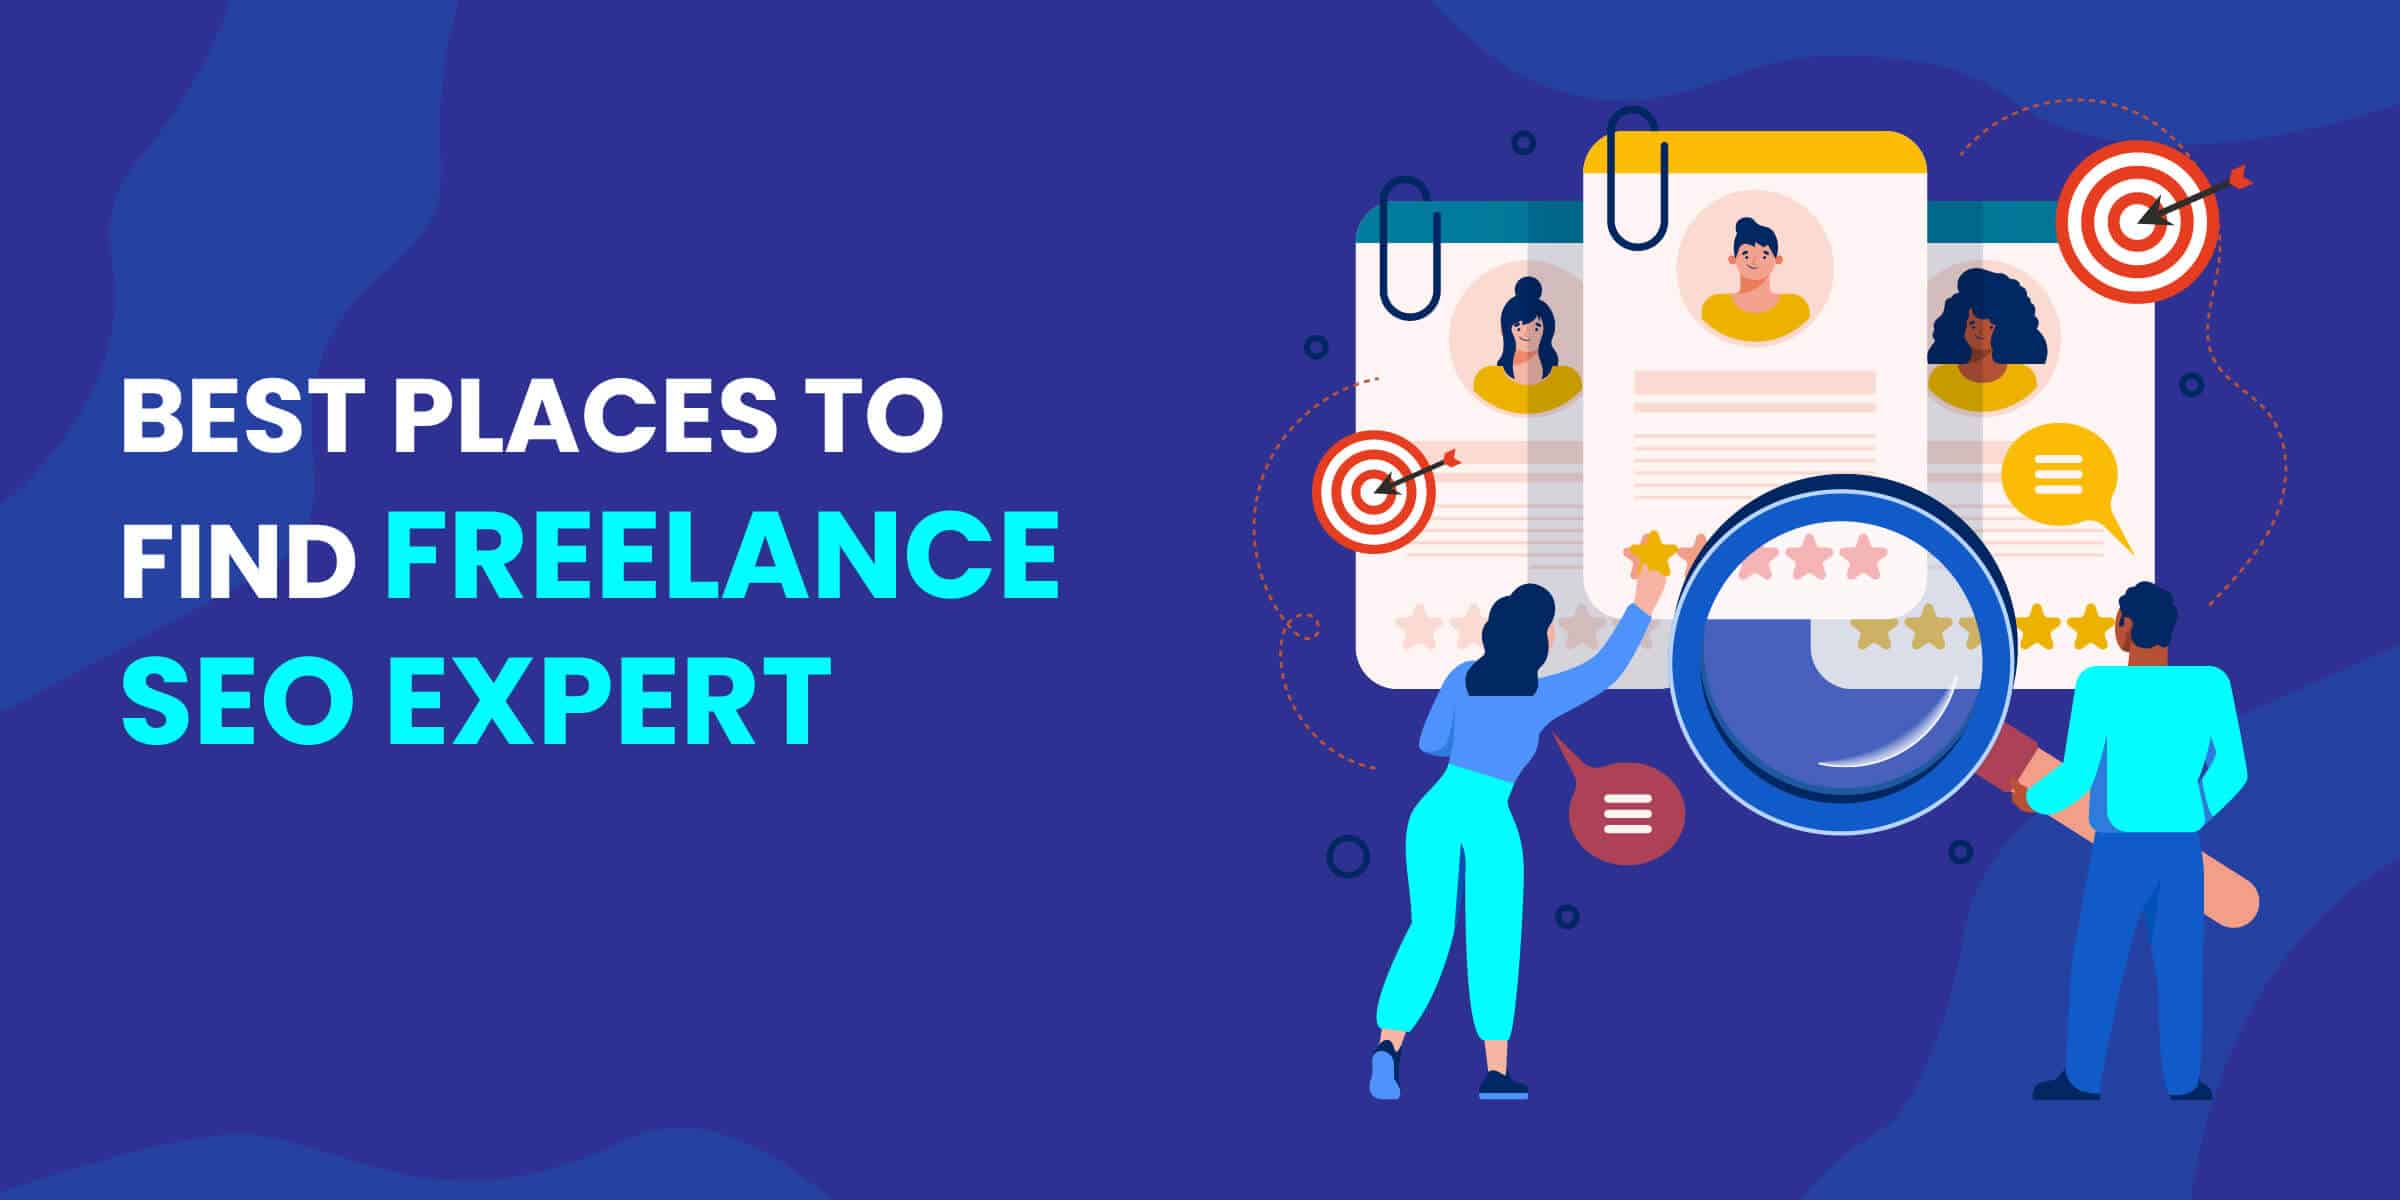 Best Places to Find Freelance SEO Expert